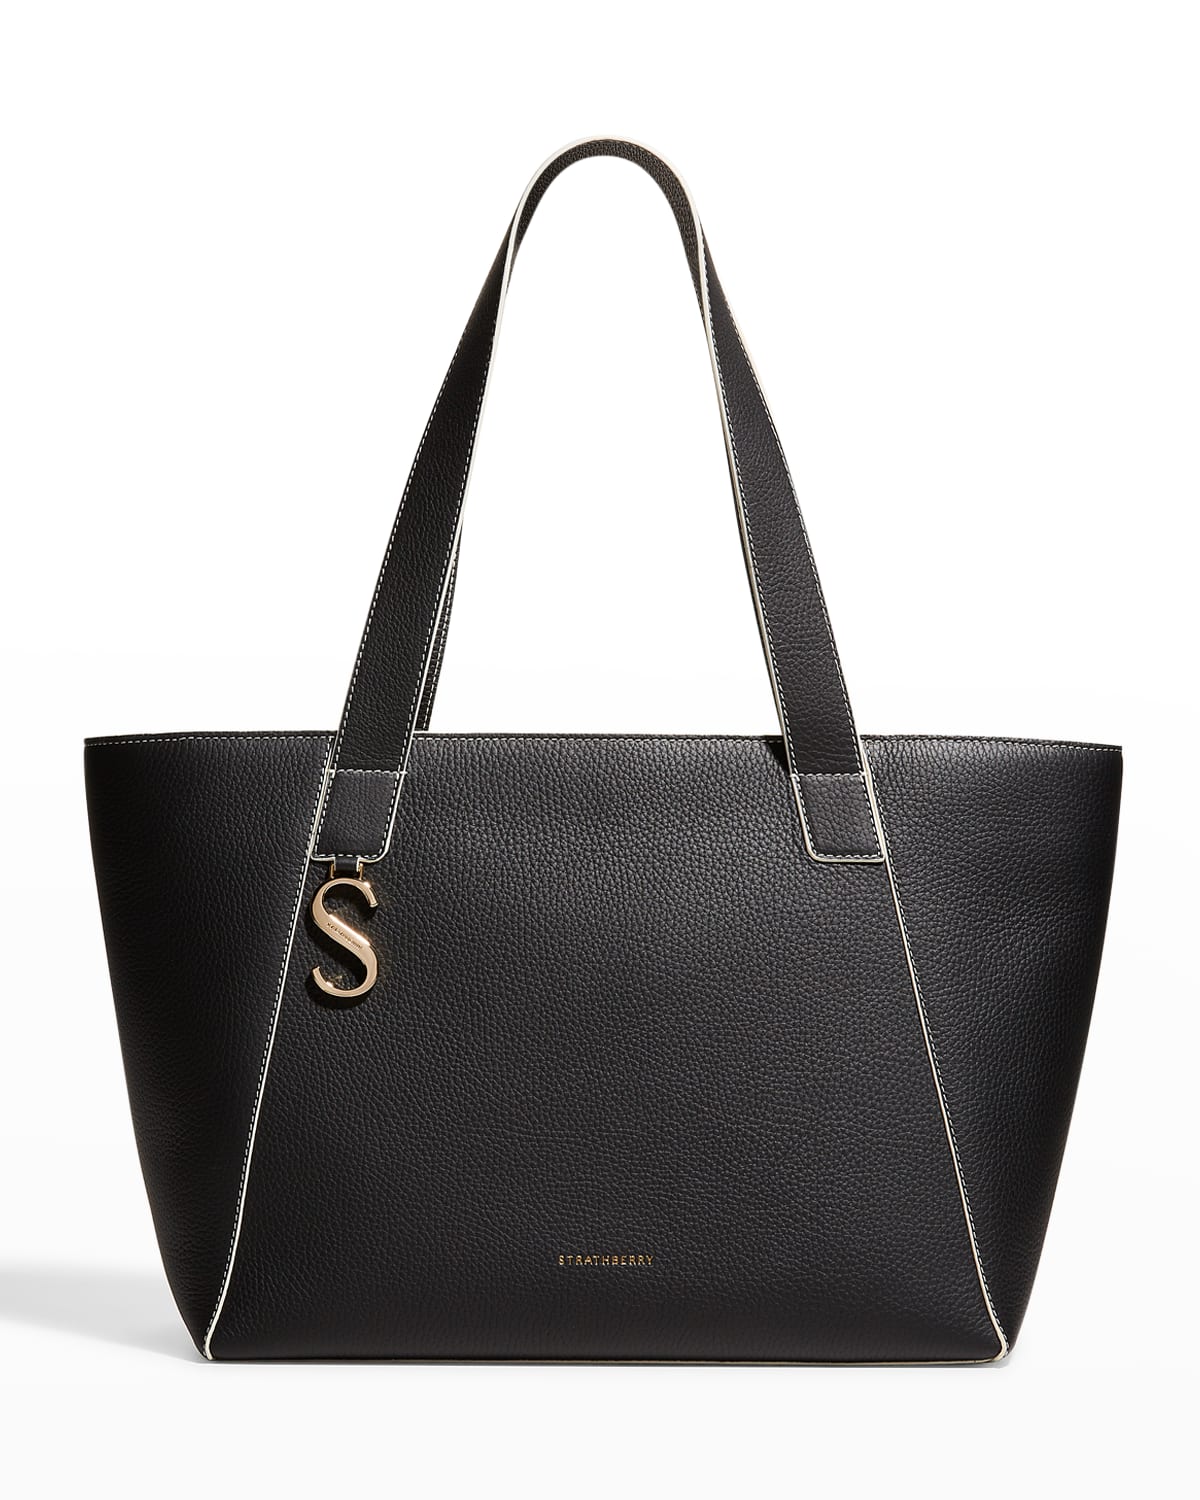 Strathberry Cabas East-west Leather Tote Bag In Black Vanilla E | ModeSens